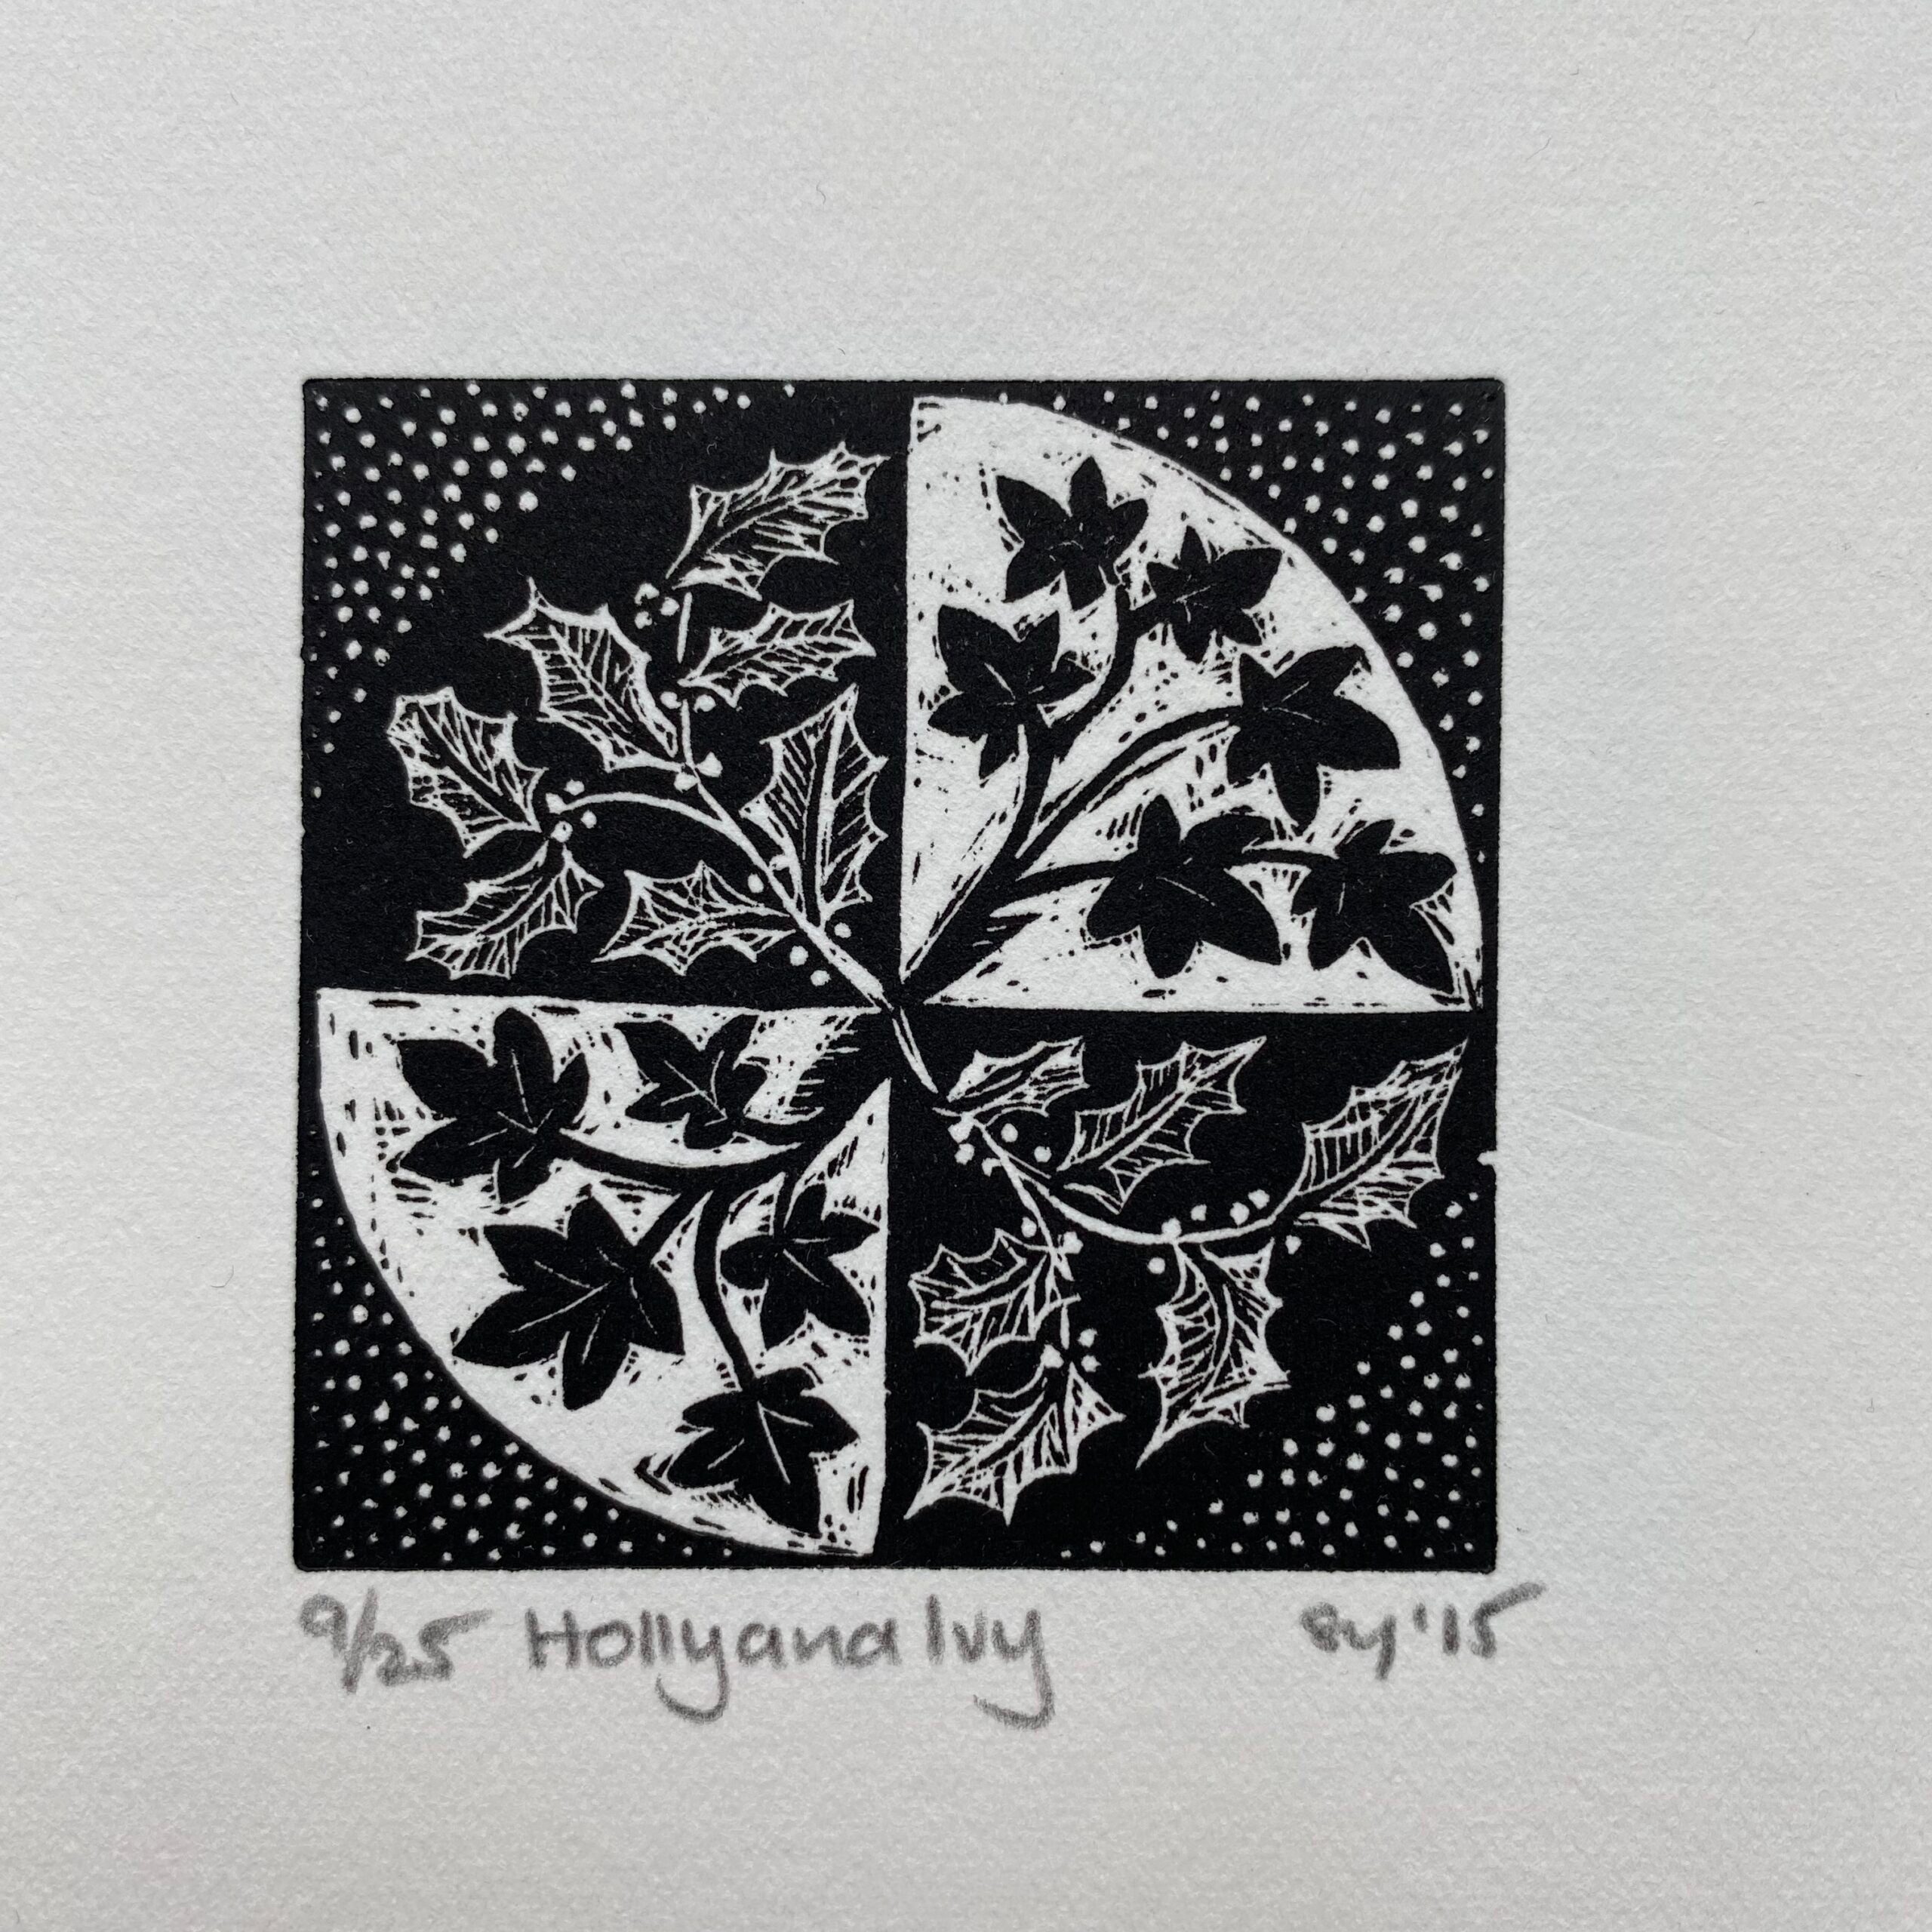 SALE - The Holly and the Ivy - Original Wood Engraving